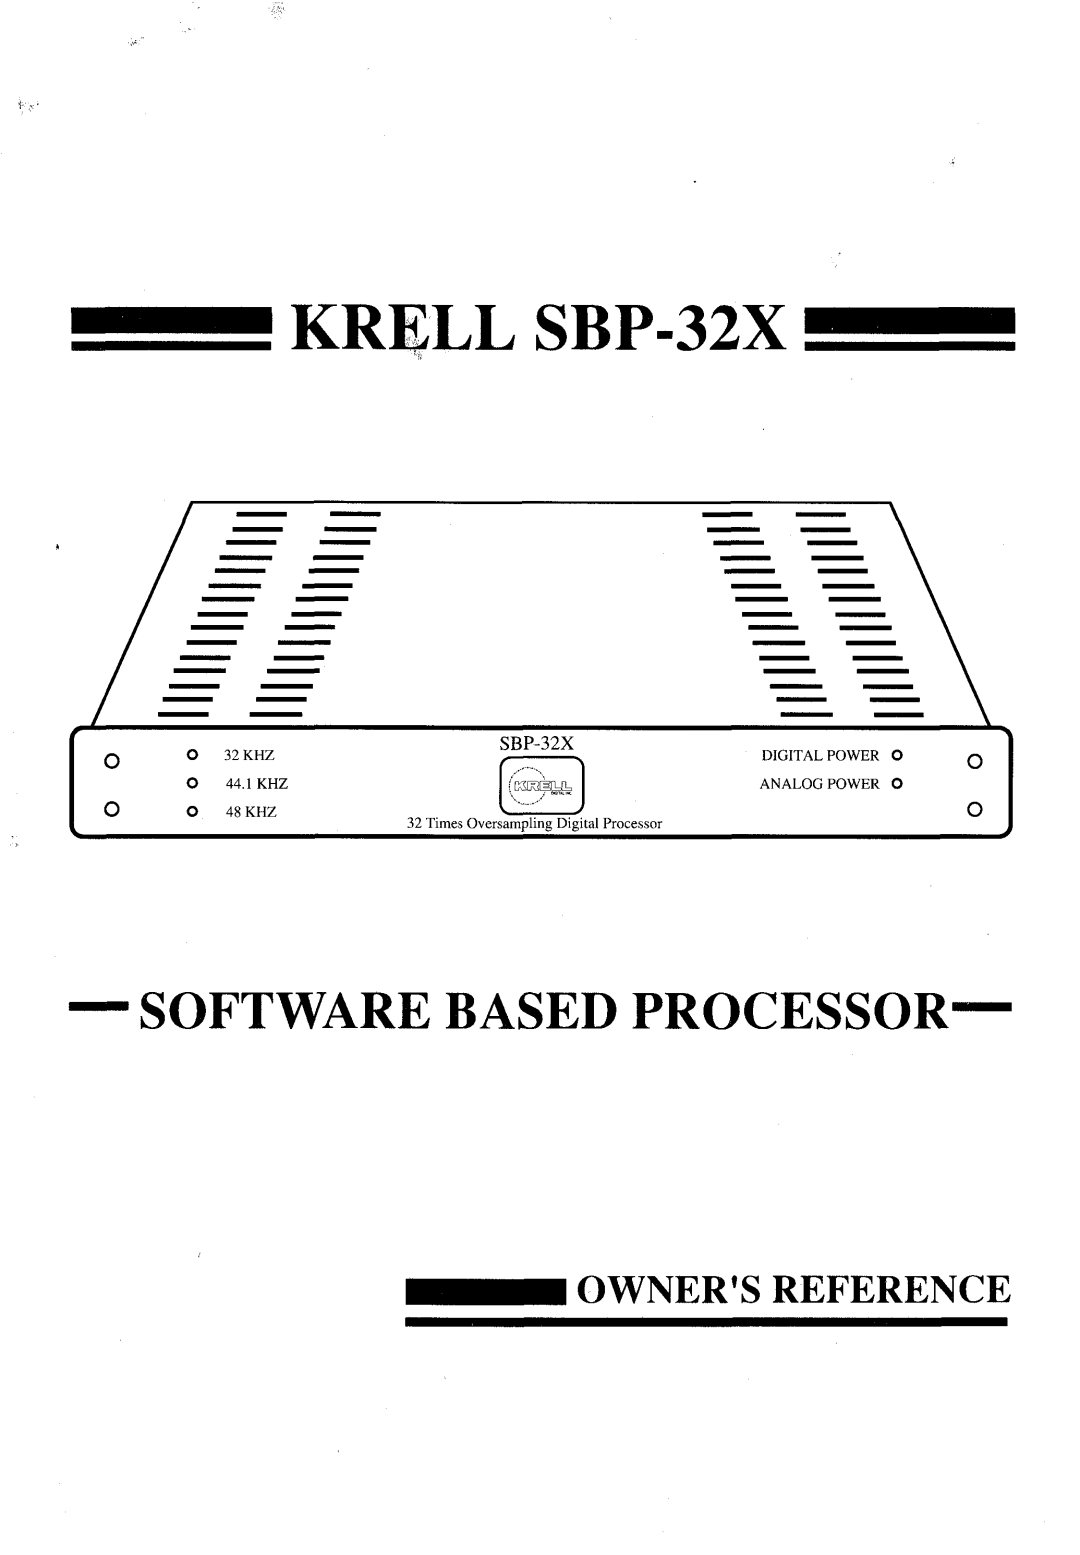 Krell Industries manual Owners Reference, KRELL SBP-32X, Softwarebased Processor 